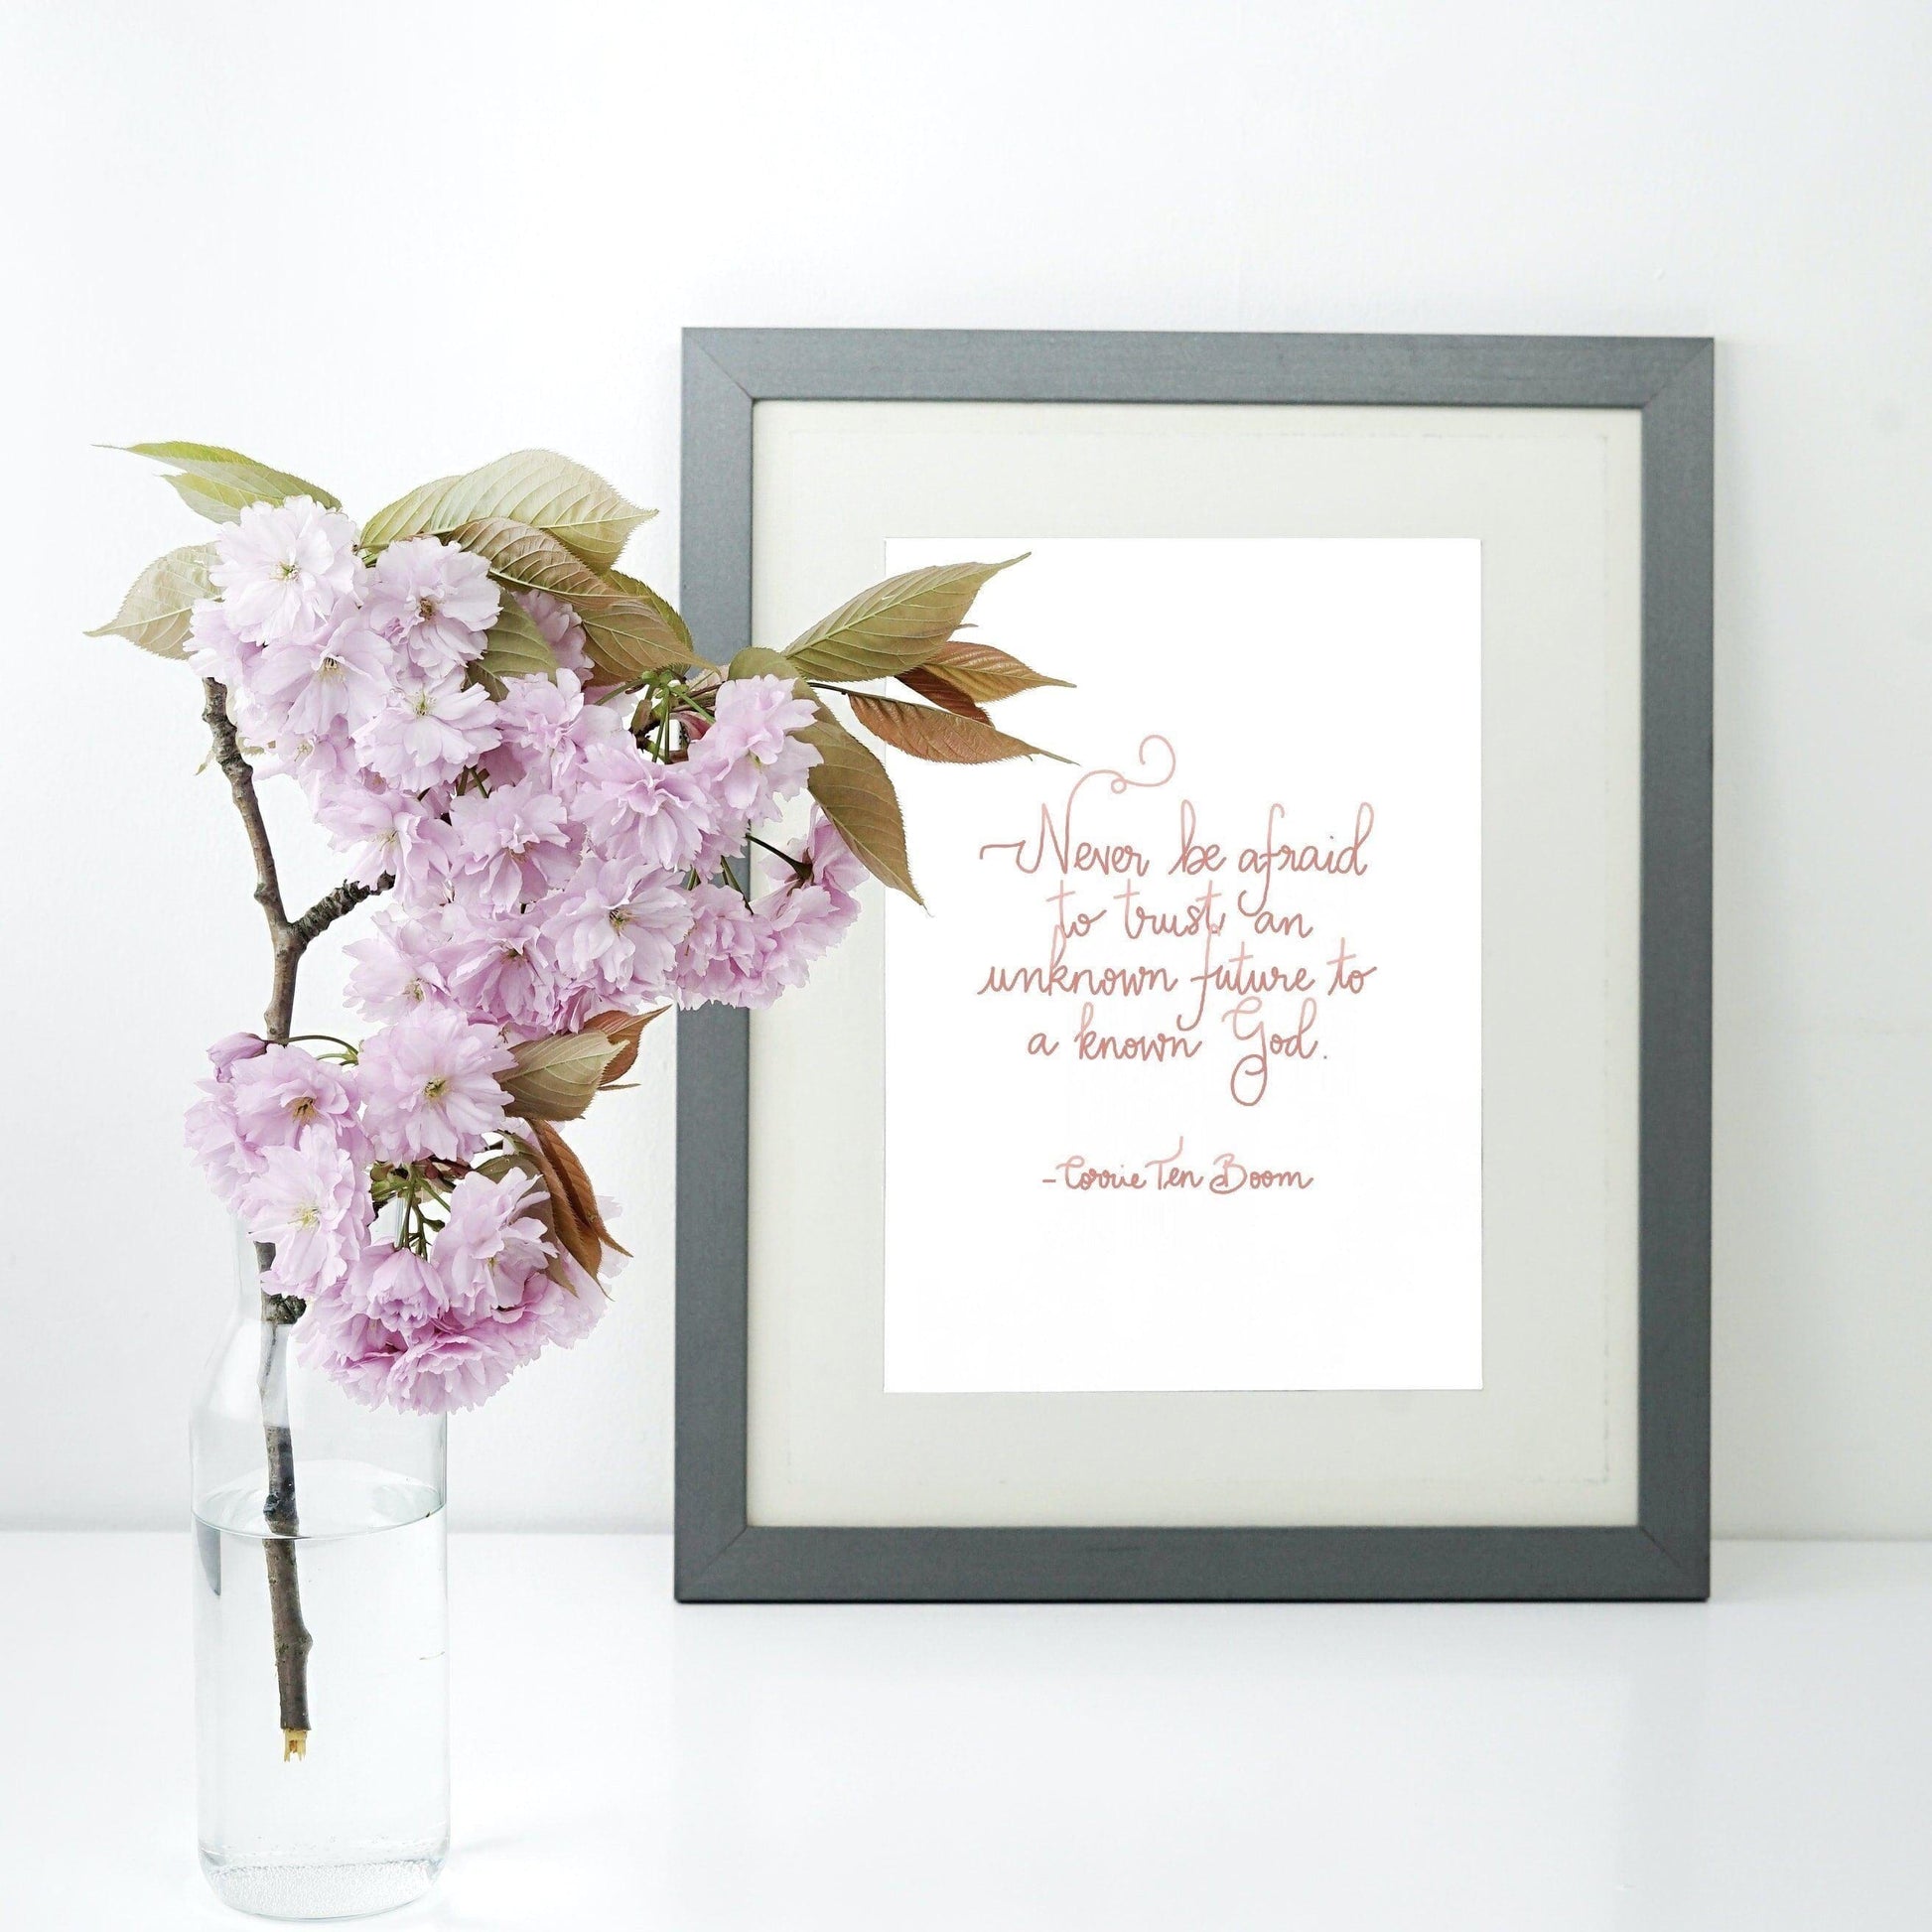 Never be afraid to trust an unknown future to a known God - Corrie ten boom print